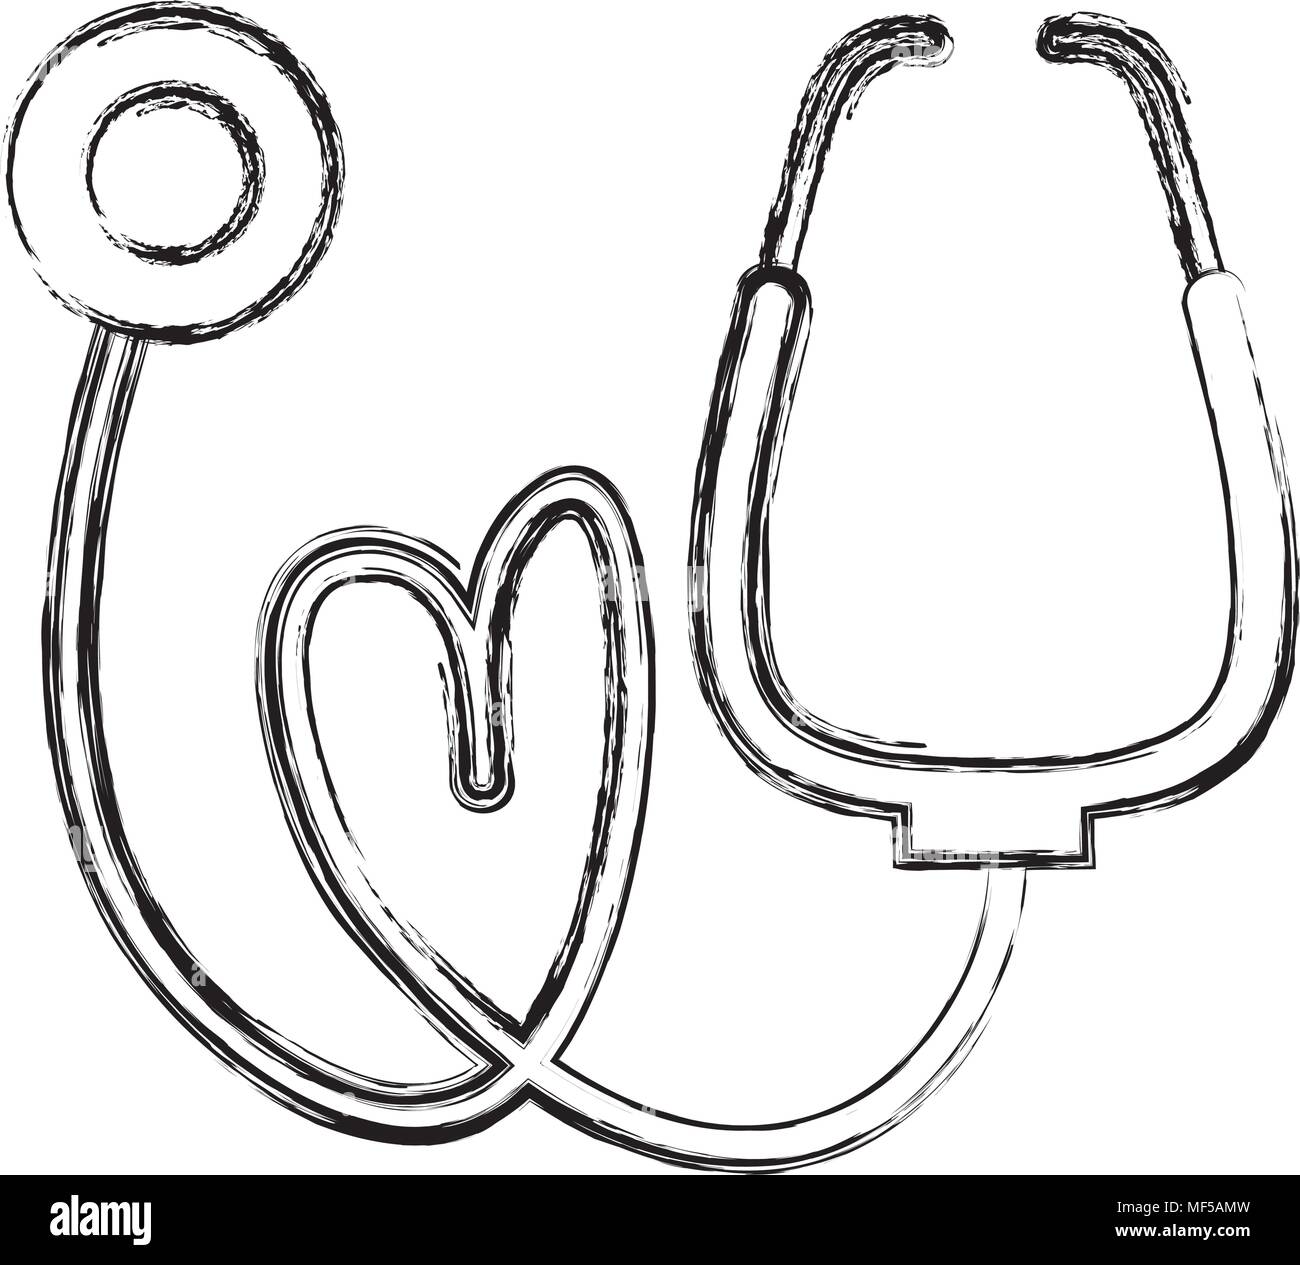 grunge medical stethoscope instrument to heartbeat sign vector illustration Stock Vector